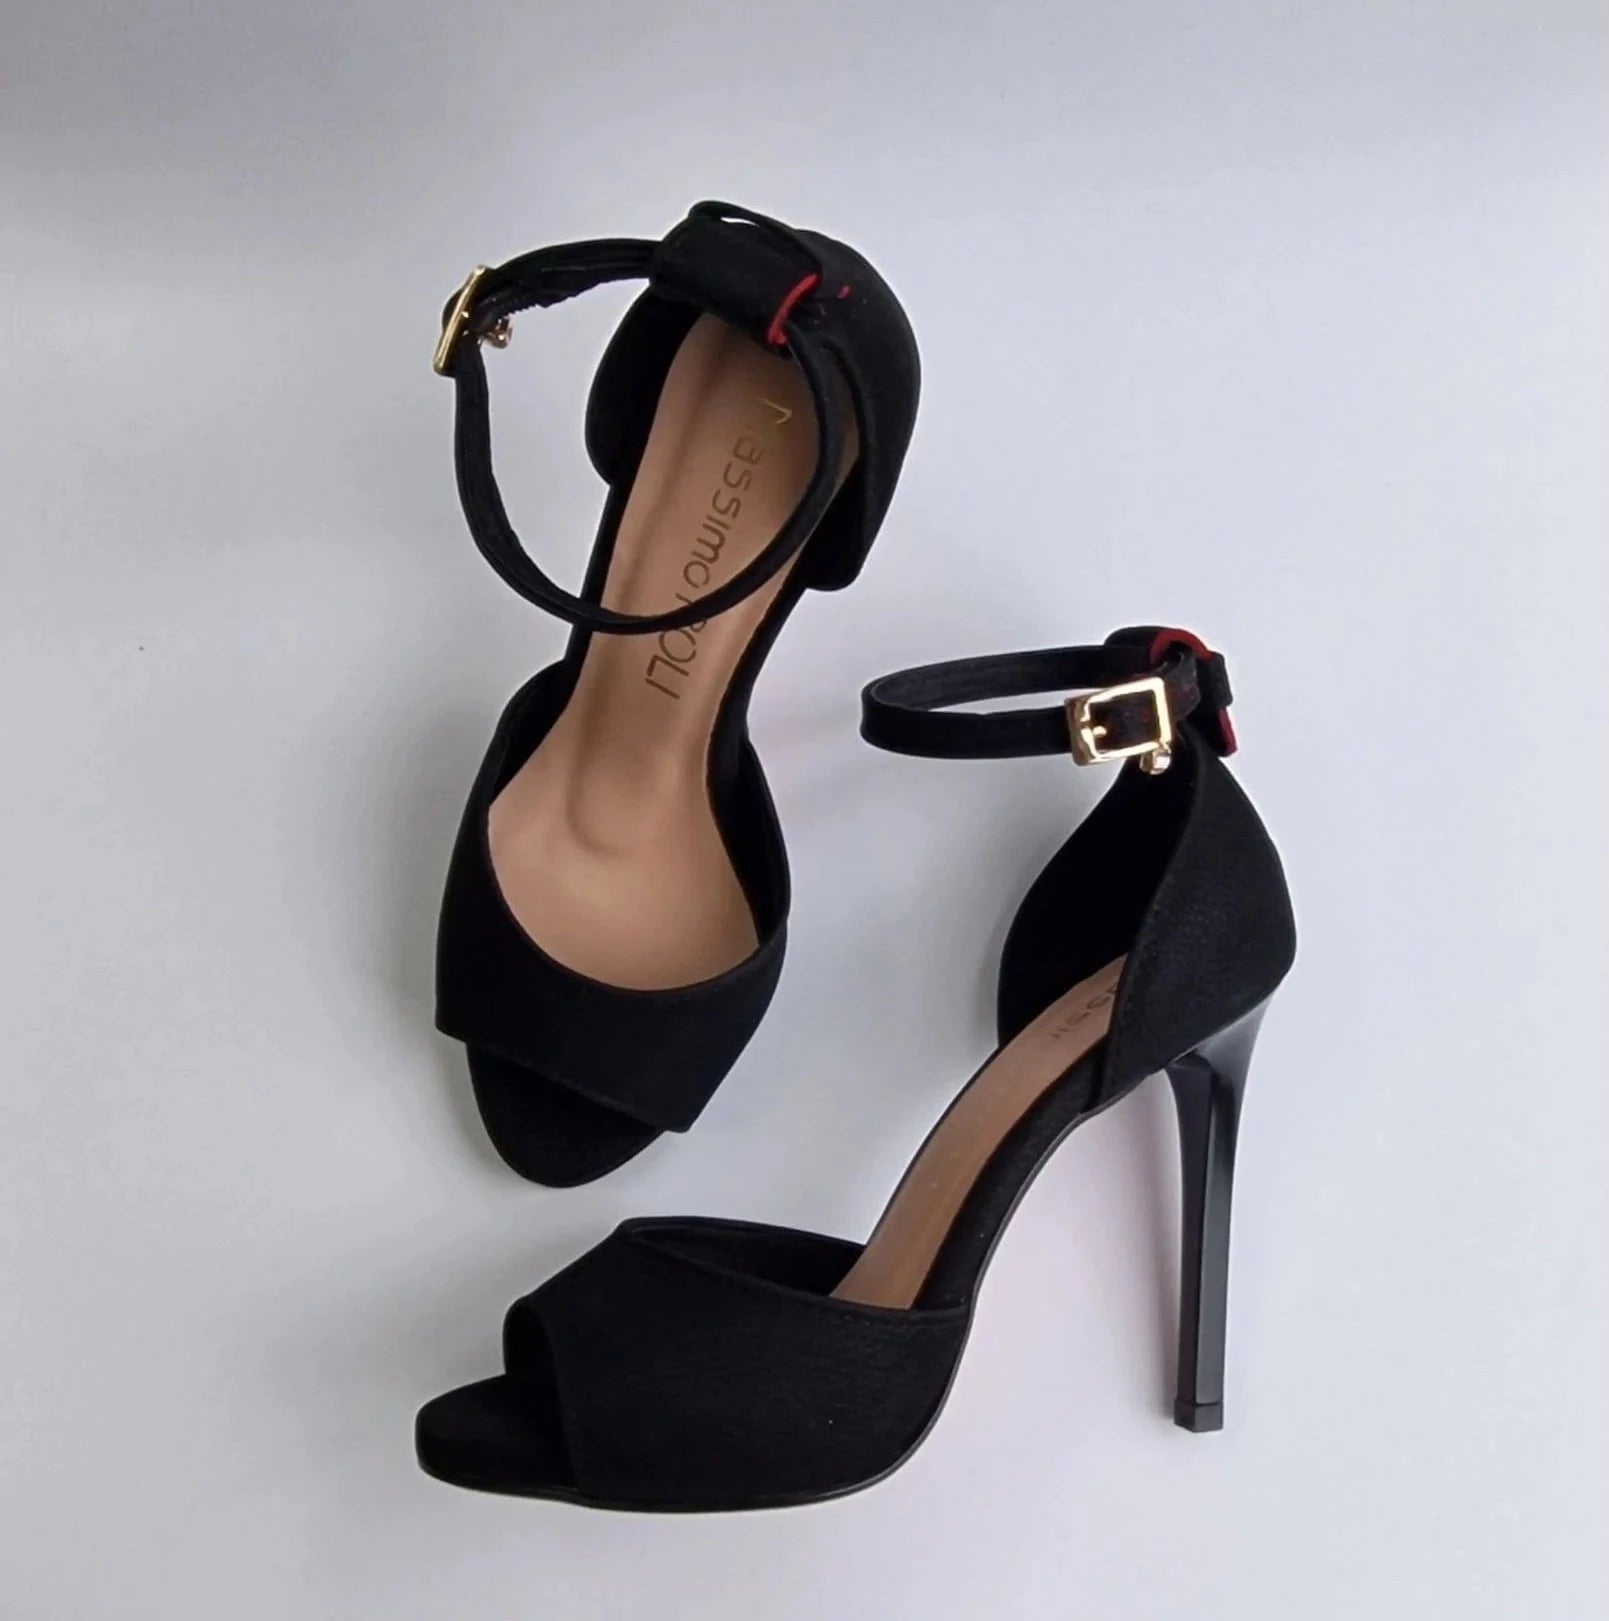 Red sole high heeled sandals in black